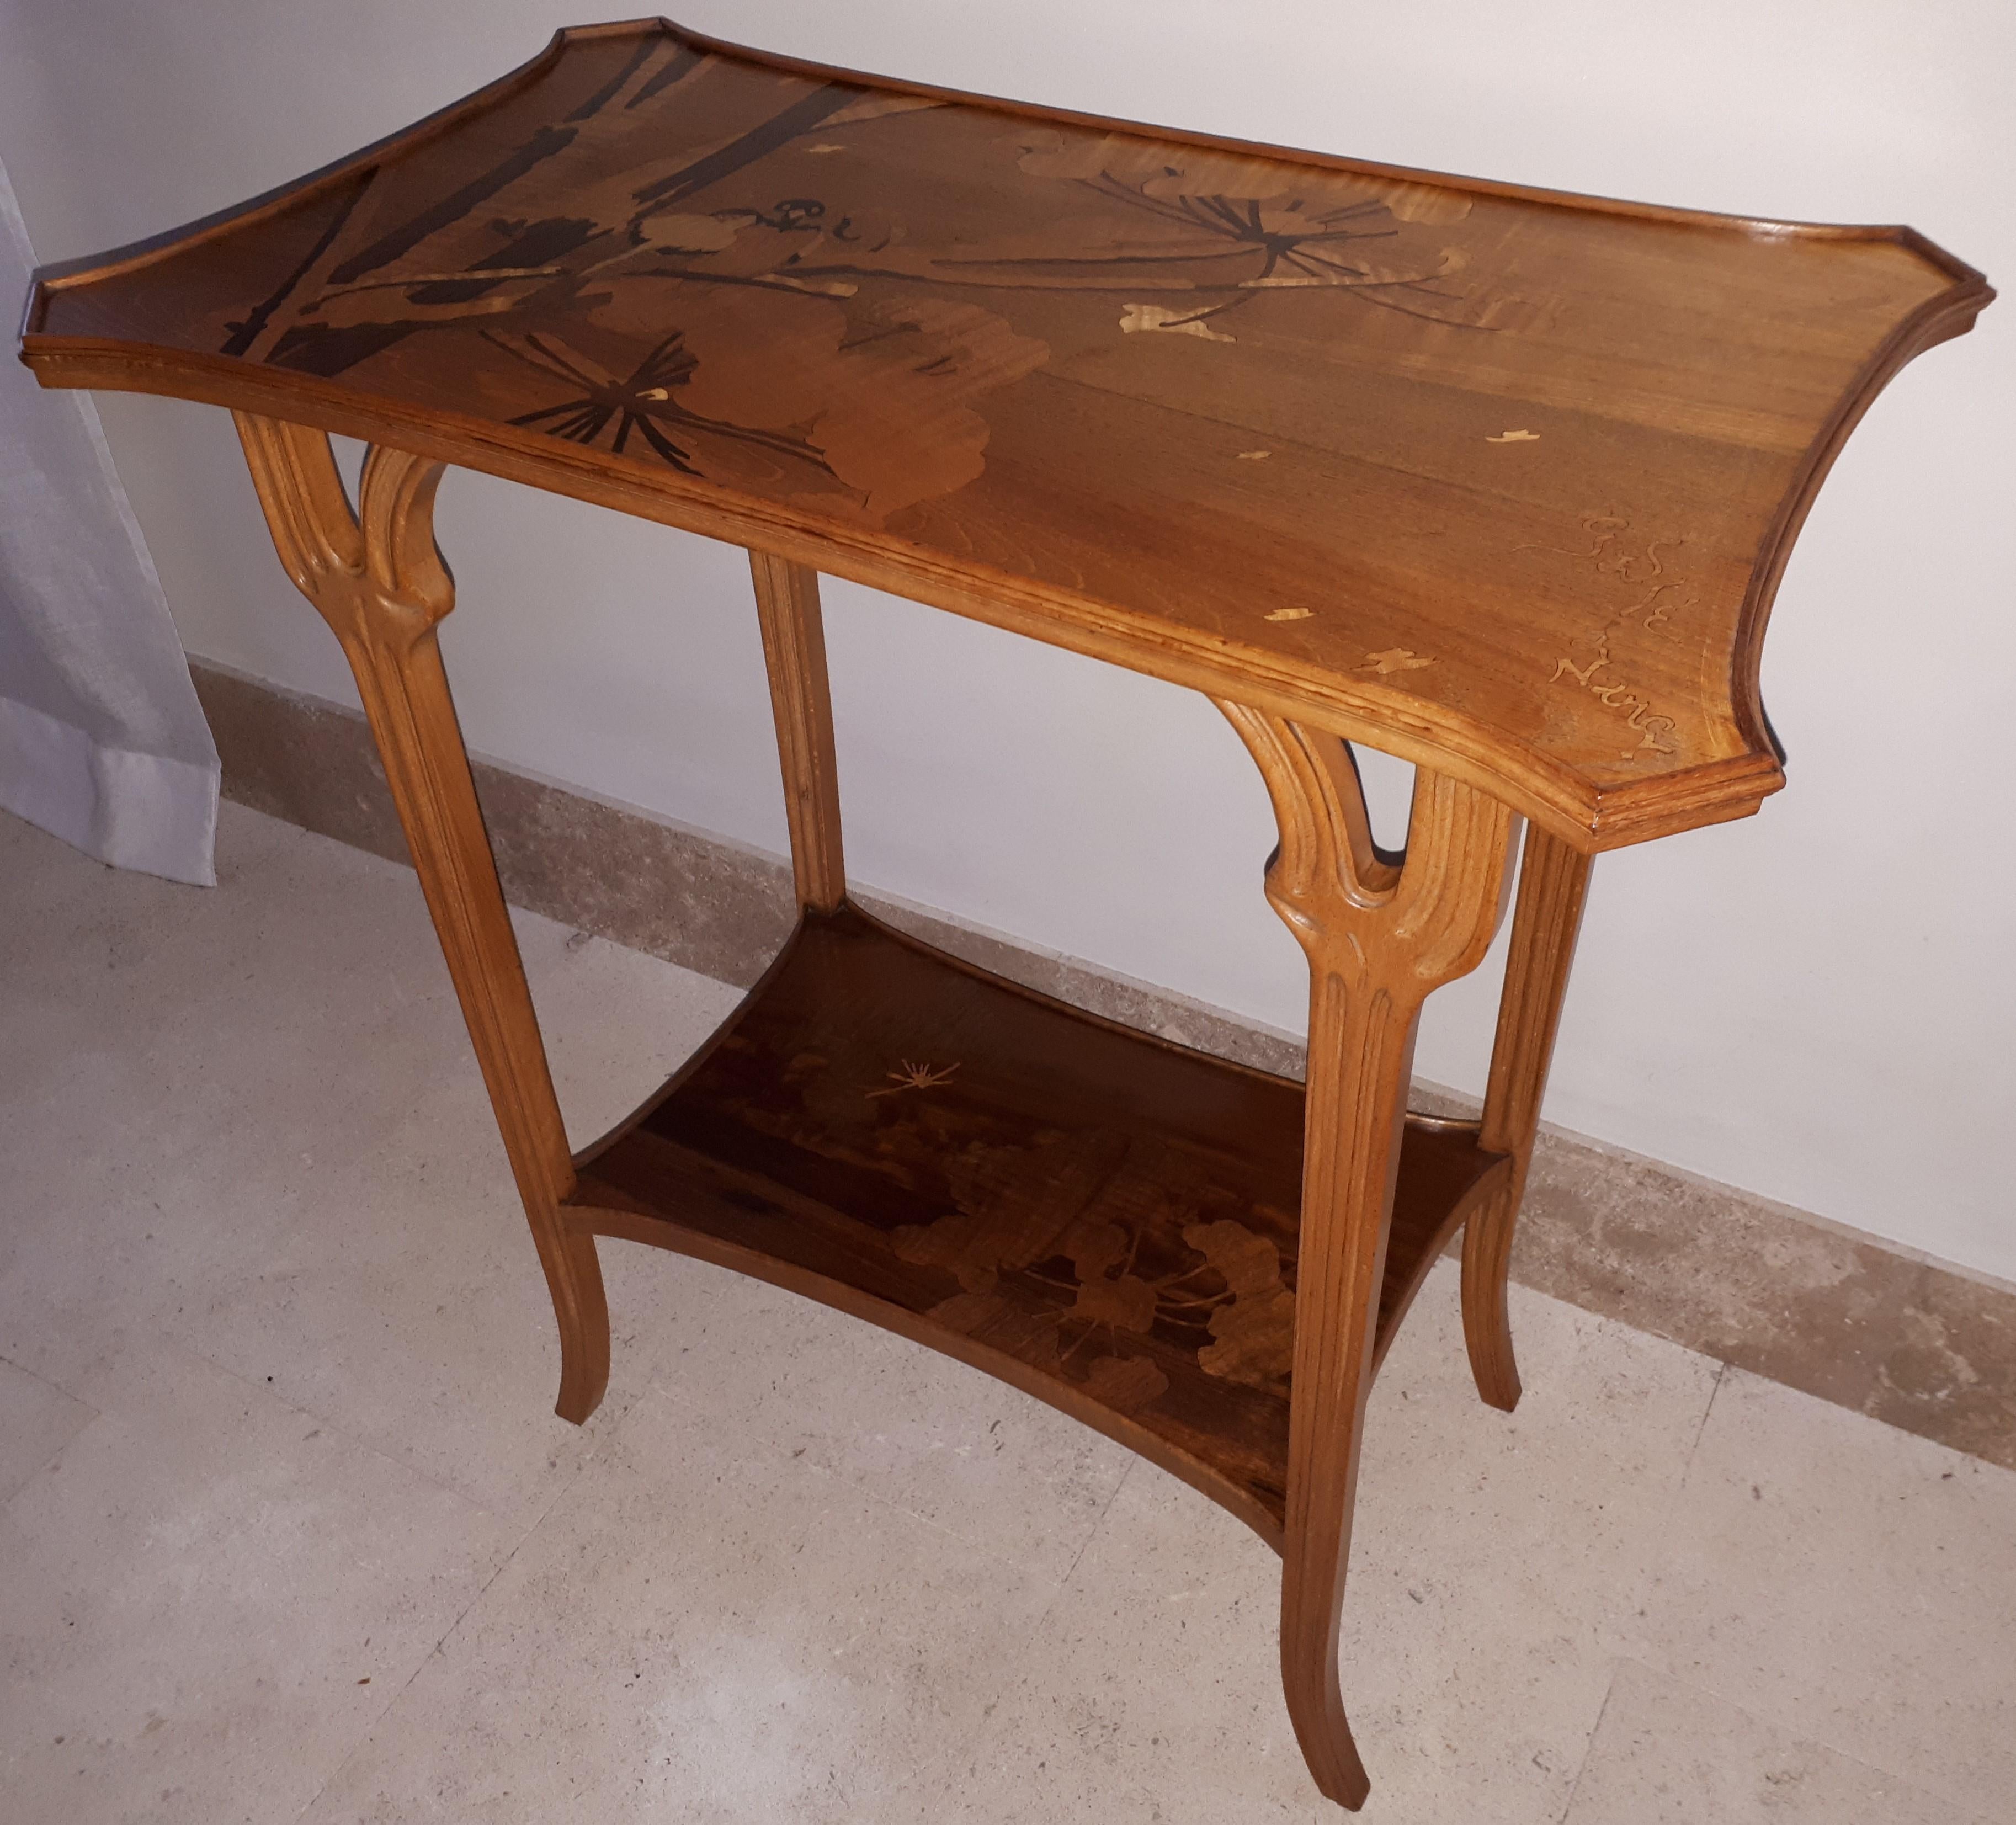 French Art Nouveau Gallé Table with Umbels Decor